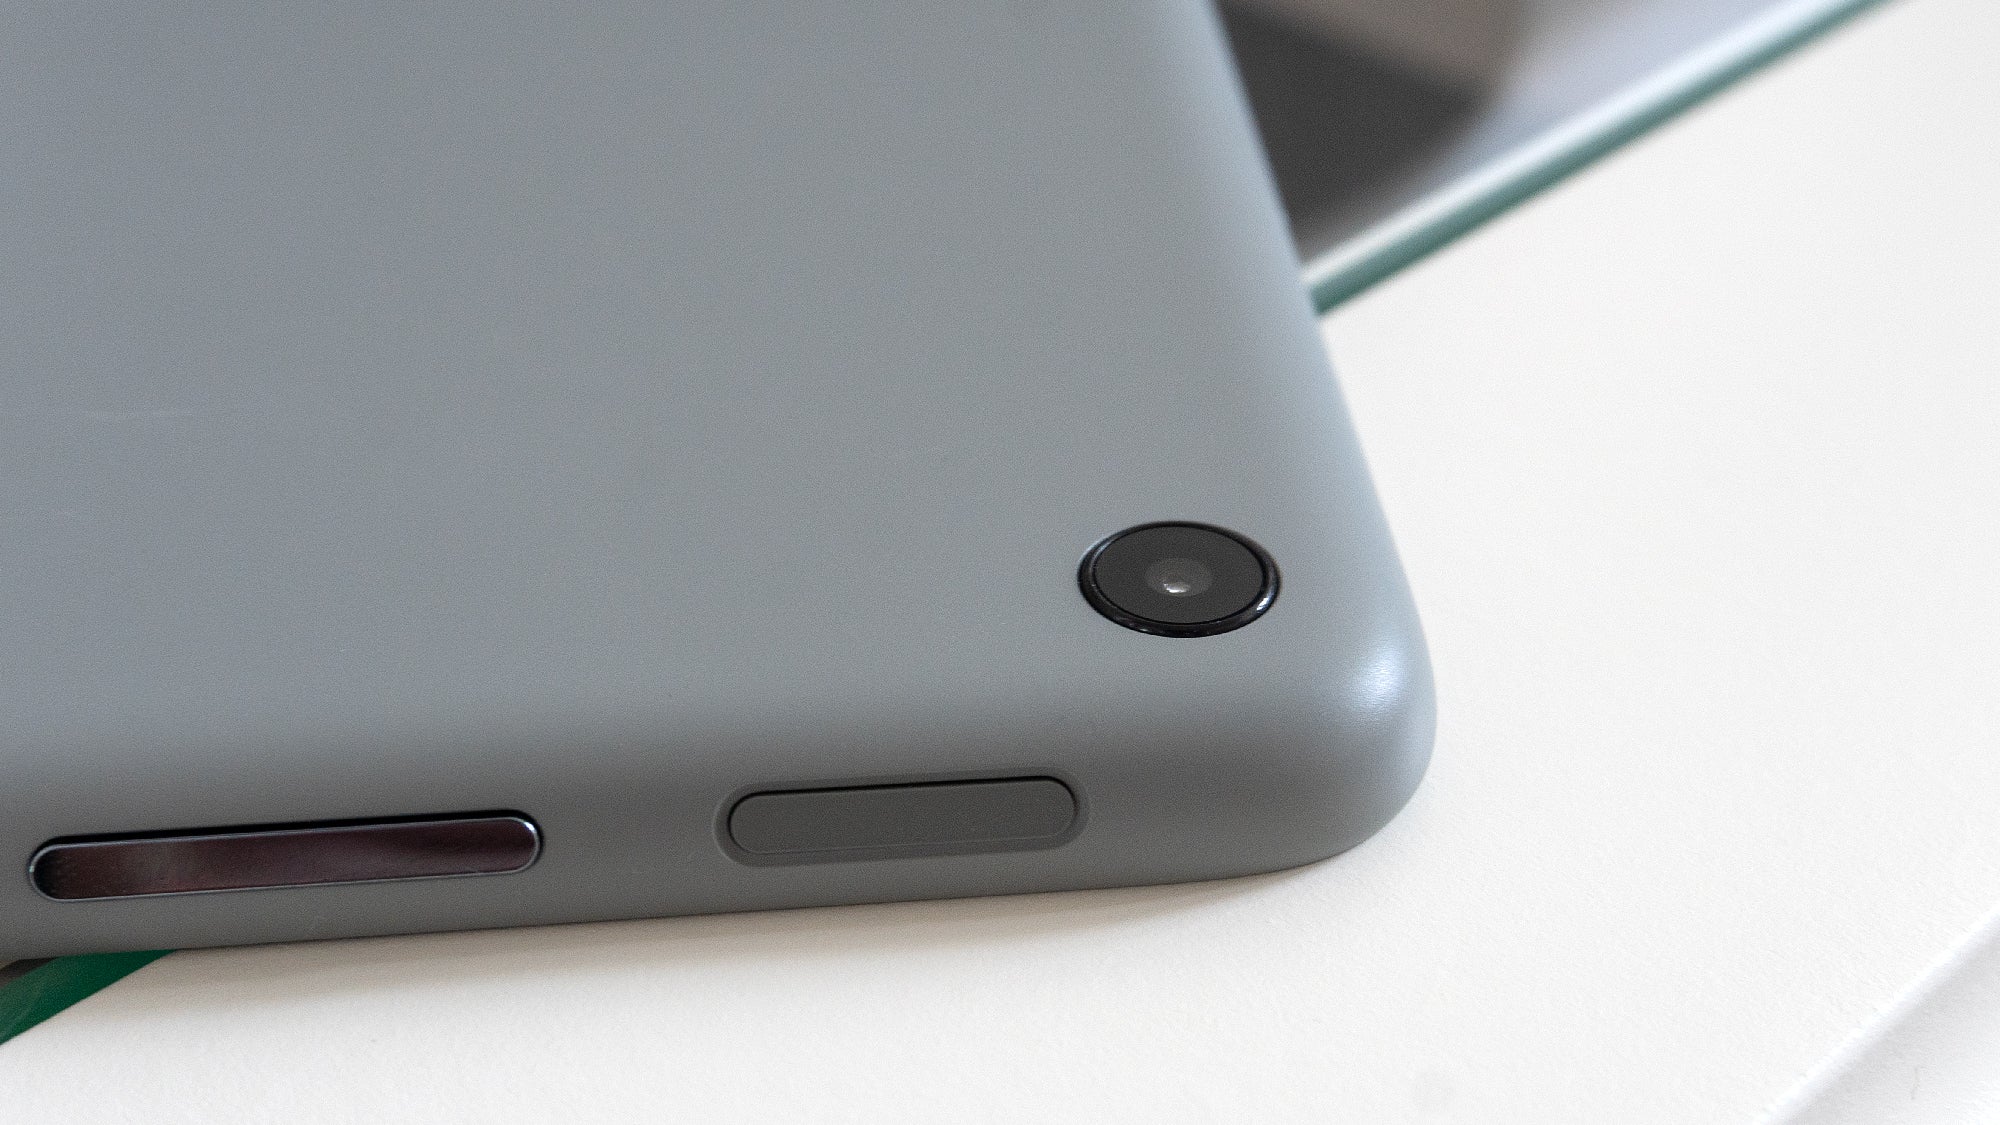 The Pixel Tablet offers just a single, fixed-focus, 8MP camera on the back. (Photo: Andrew Liszewski | Gizmodo)